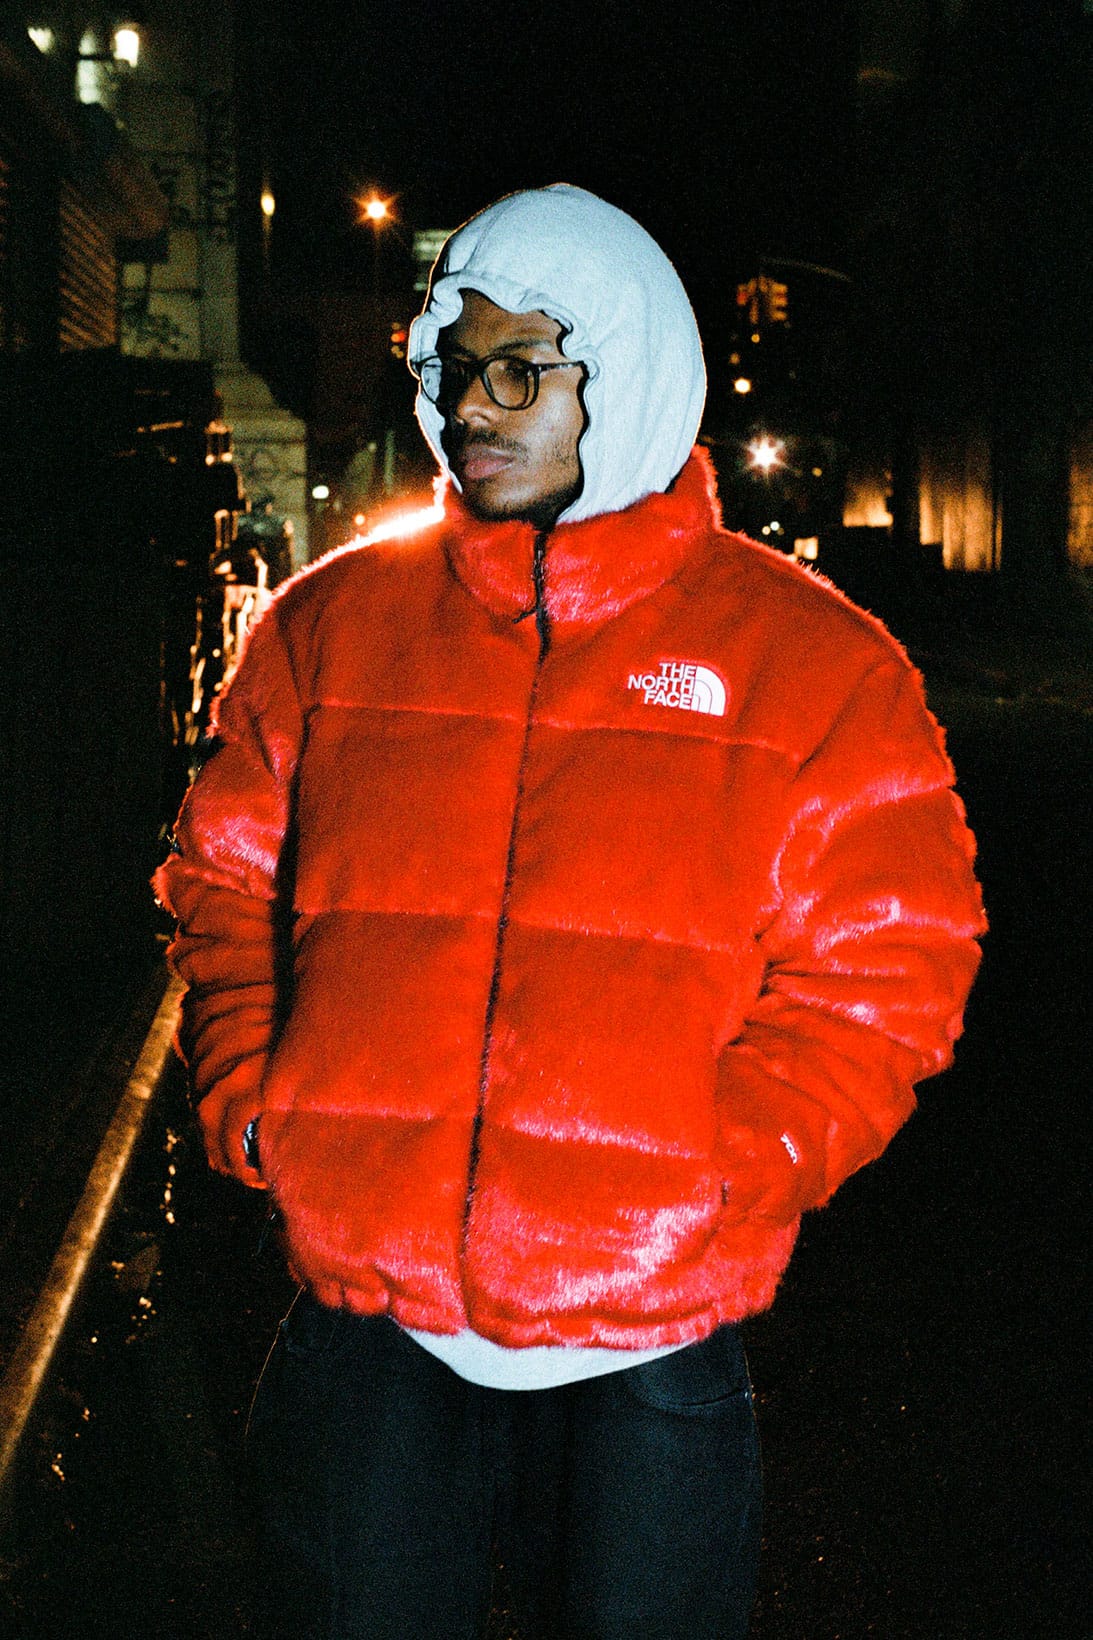 north face red puffer